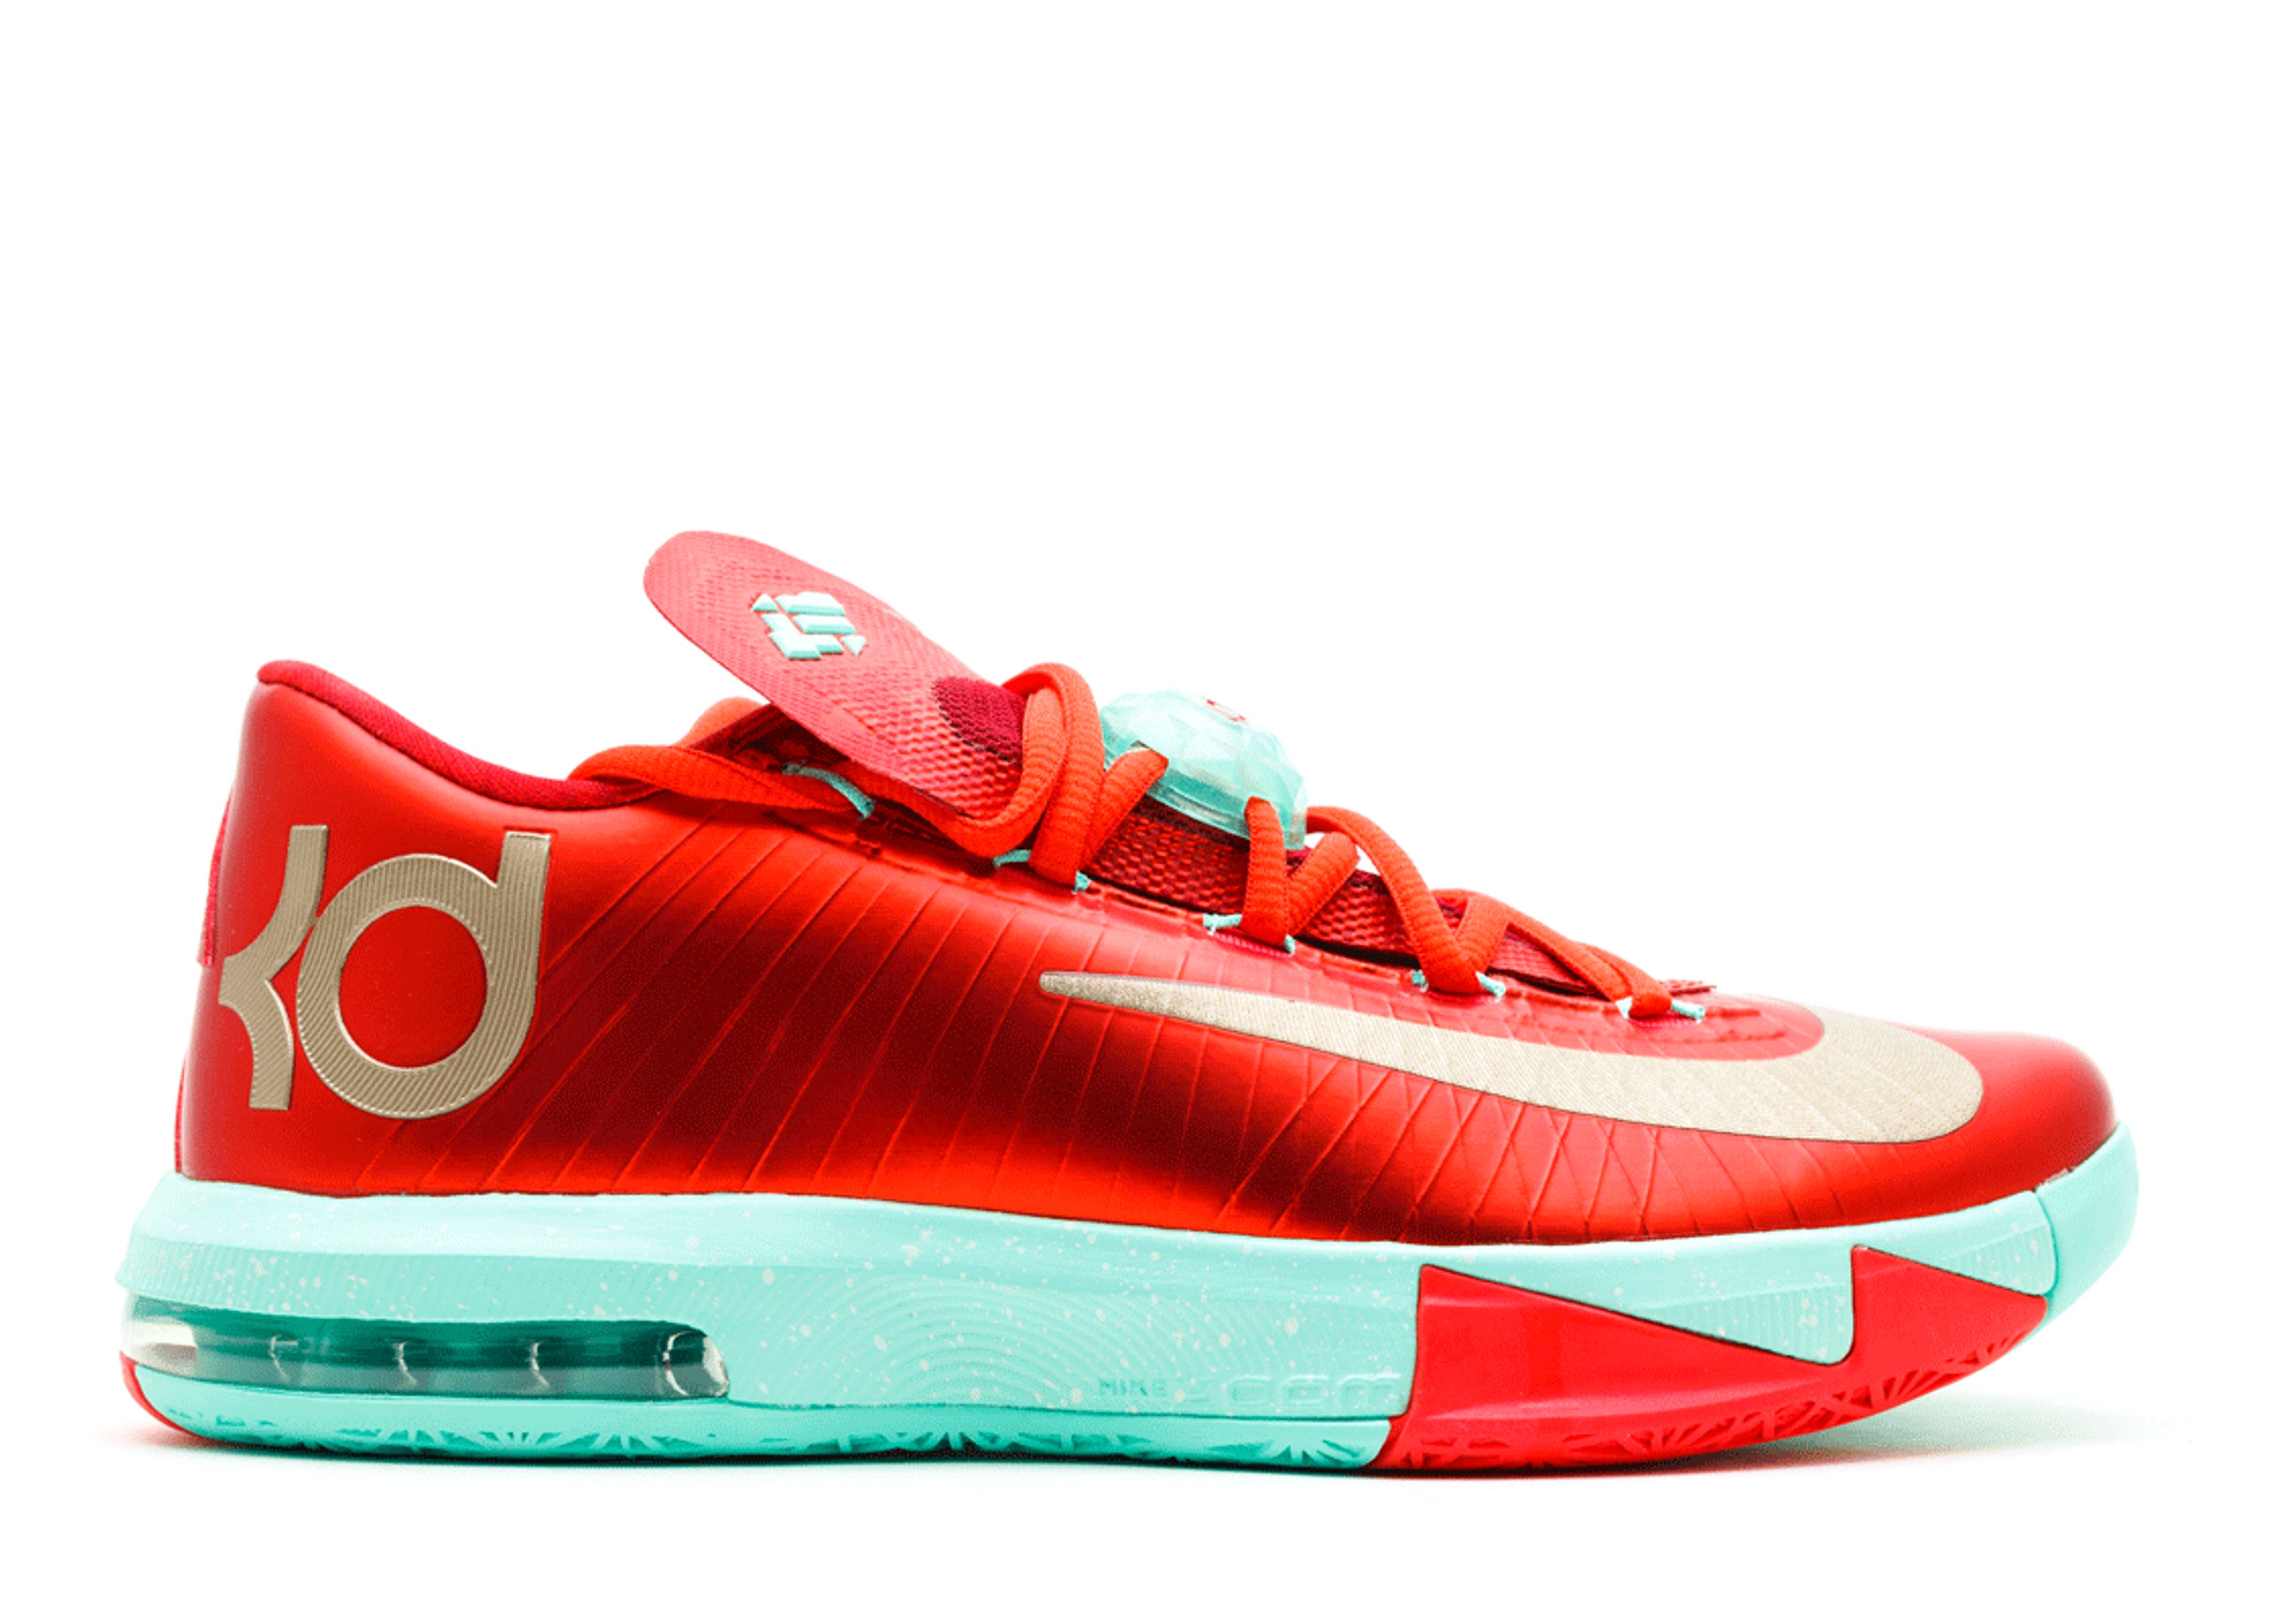 kd 6s shoes, OFF 70%,Buy!